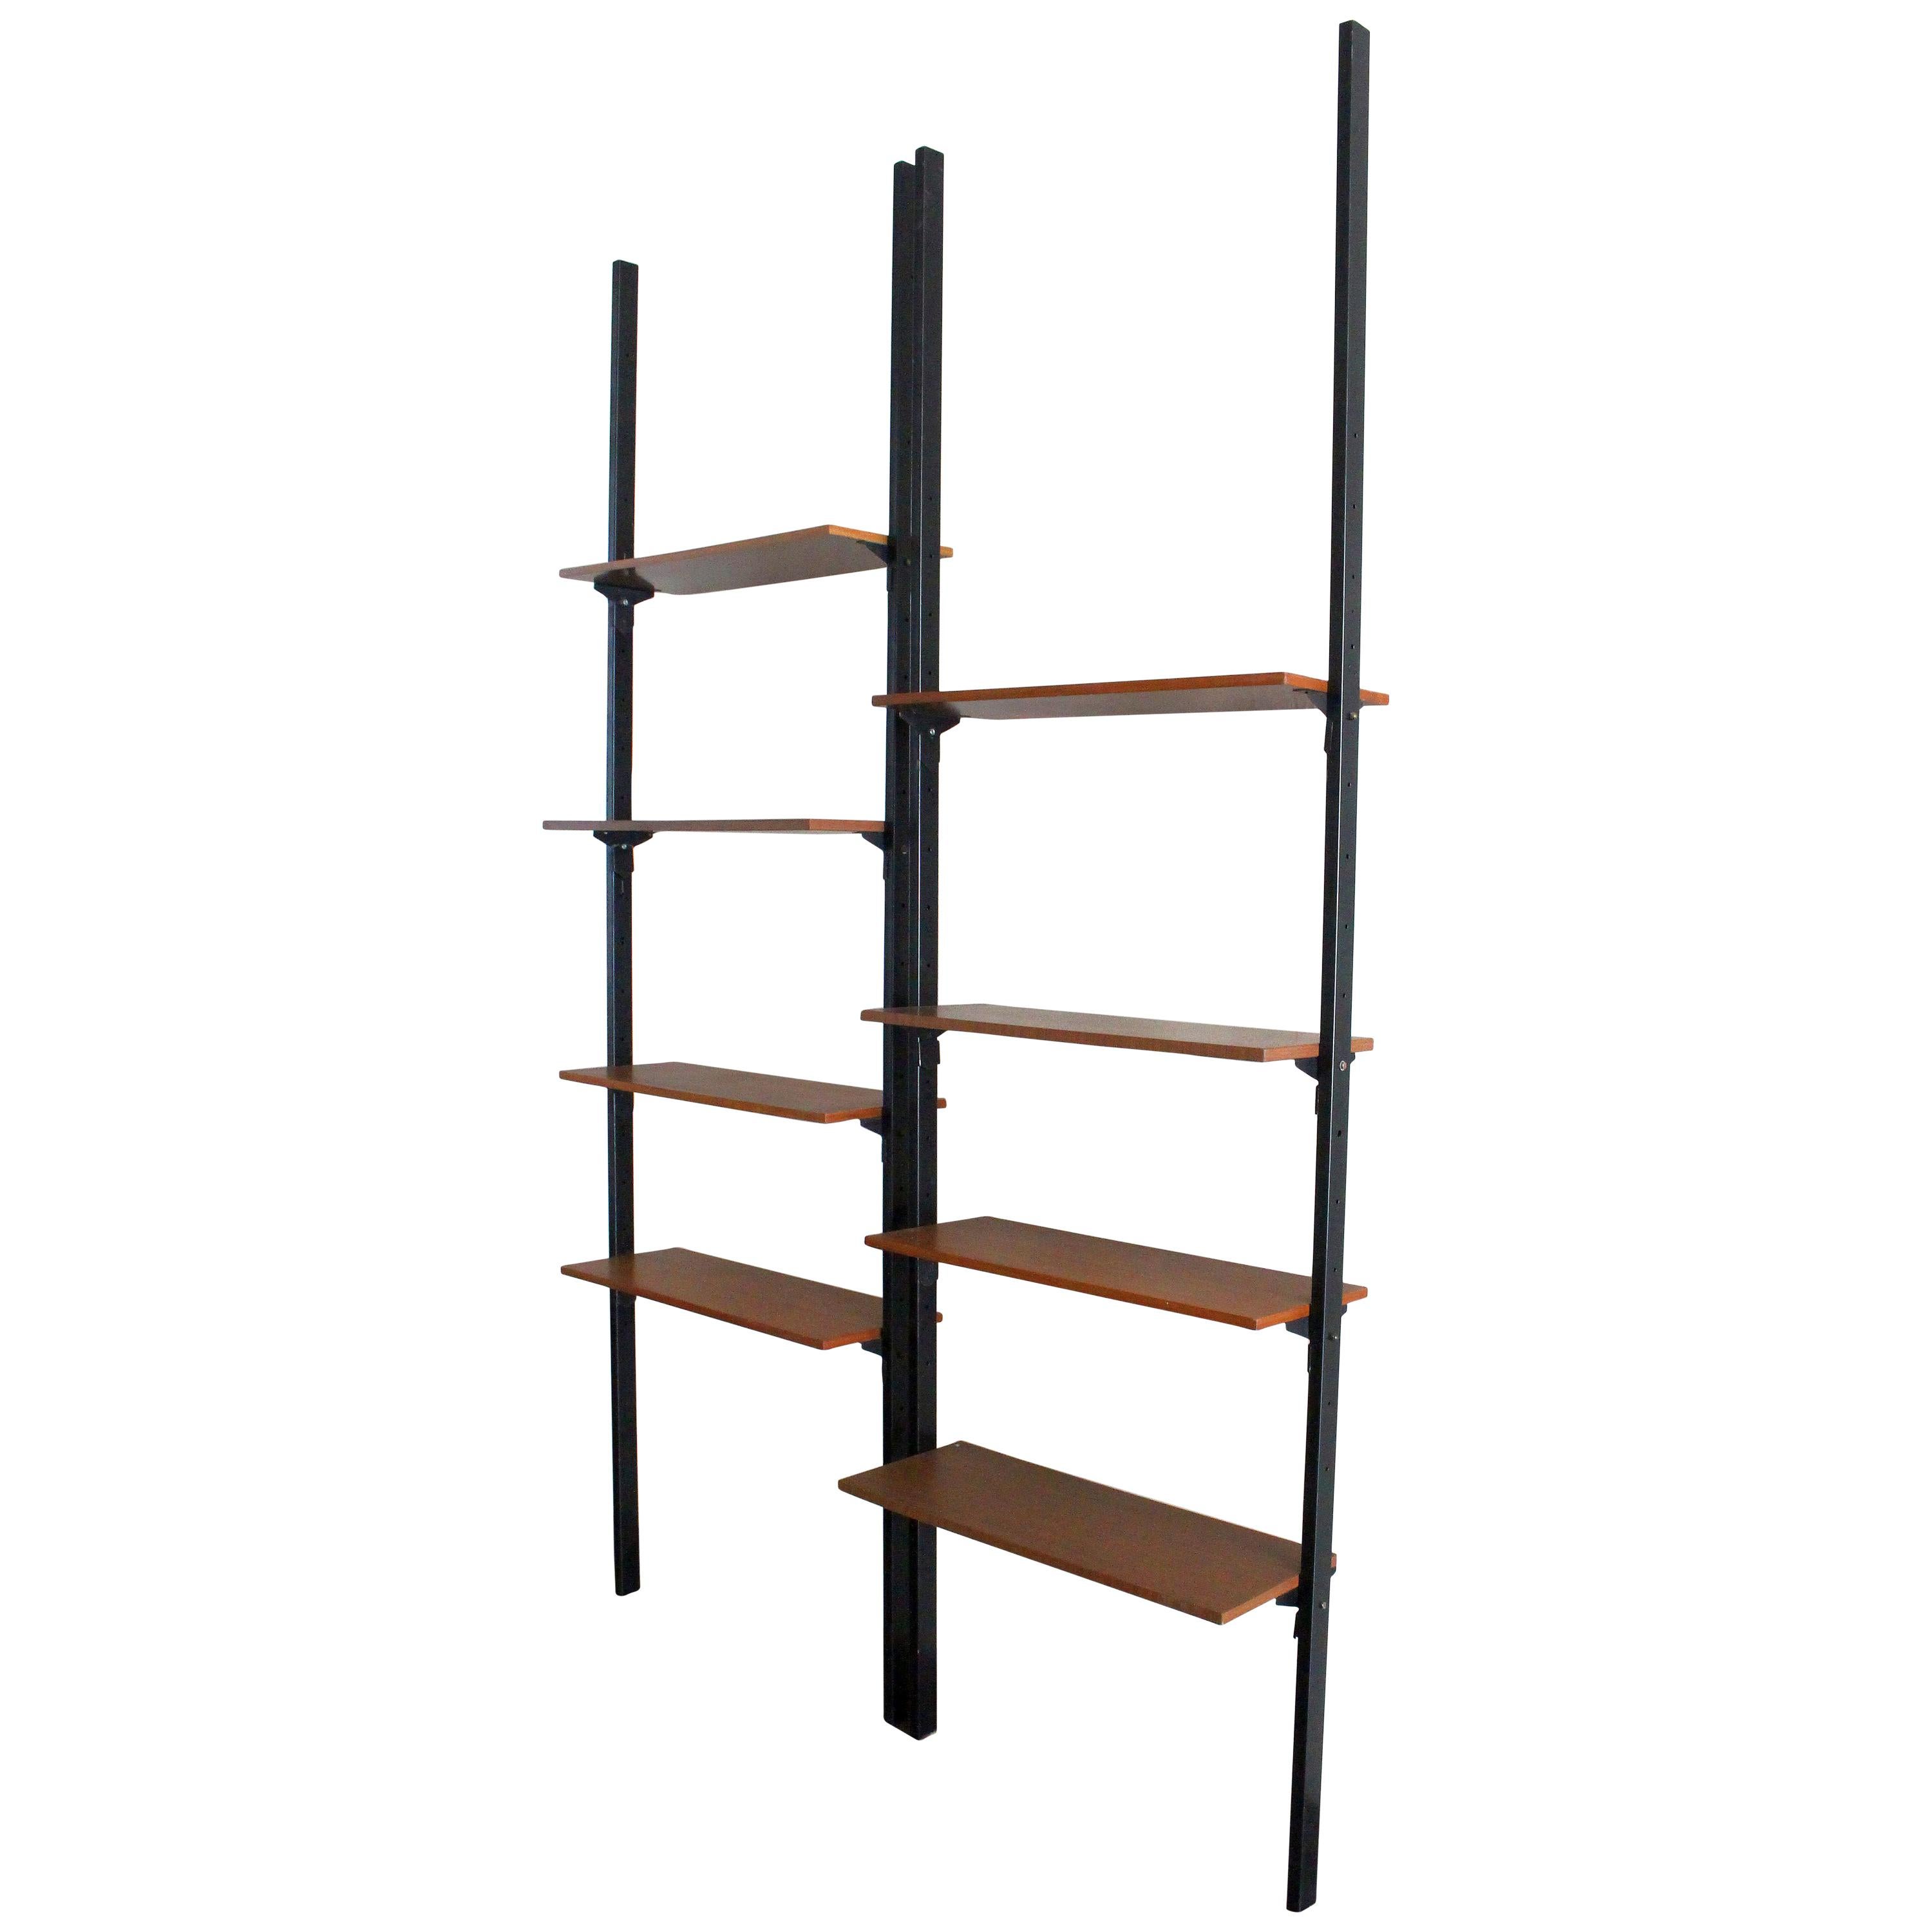 Italian Wall Shelves System For Sale